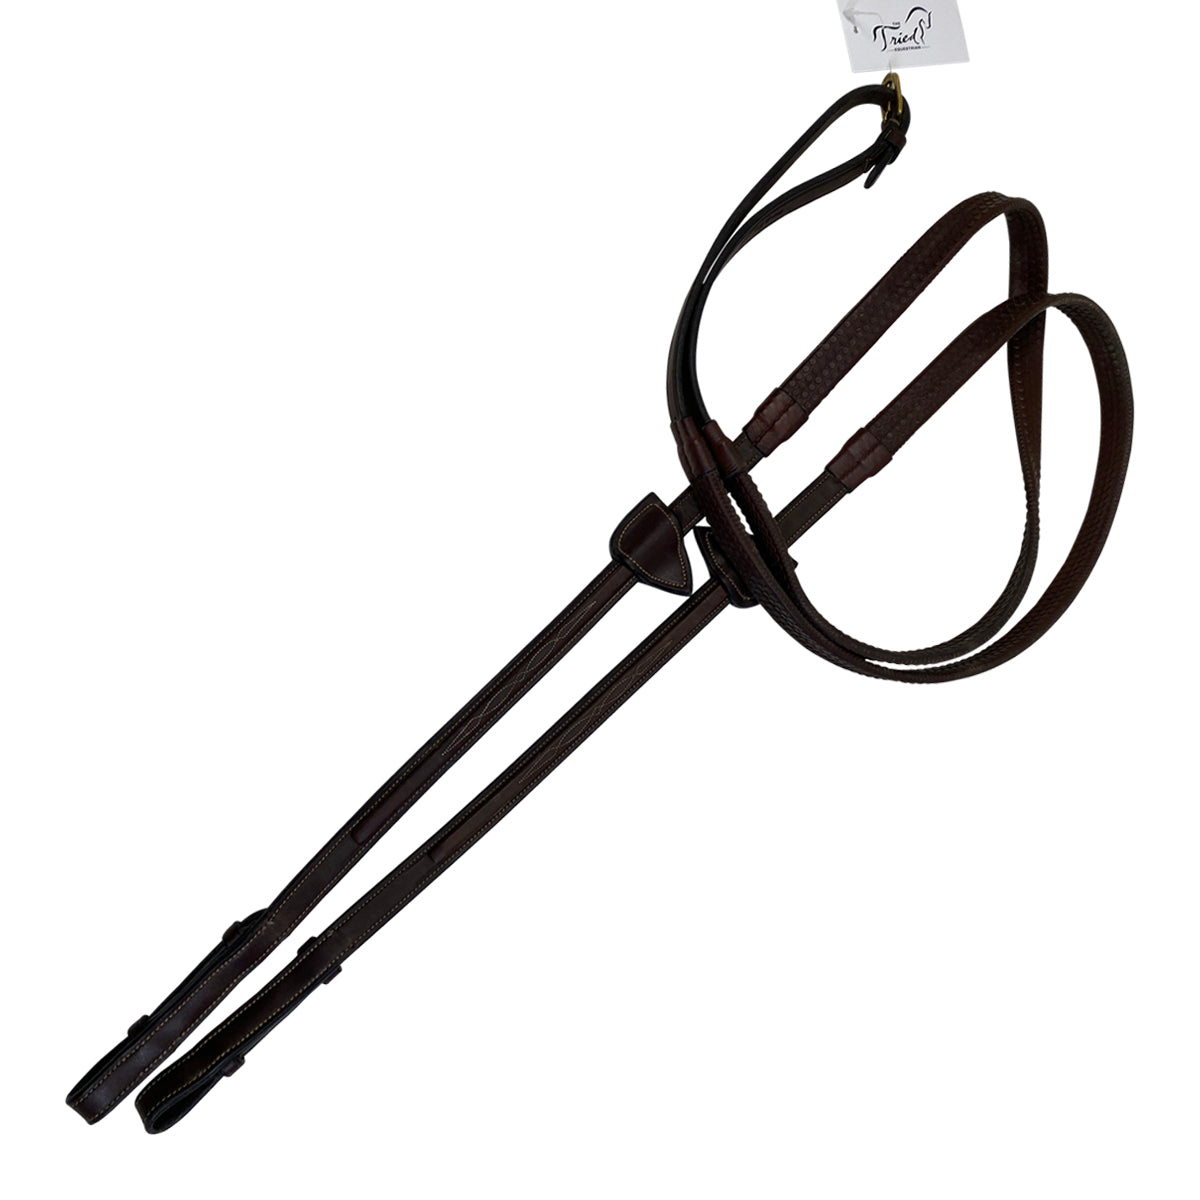 Dy'on Rubber Grip Reins in Brown